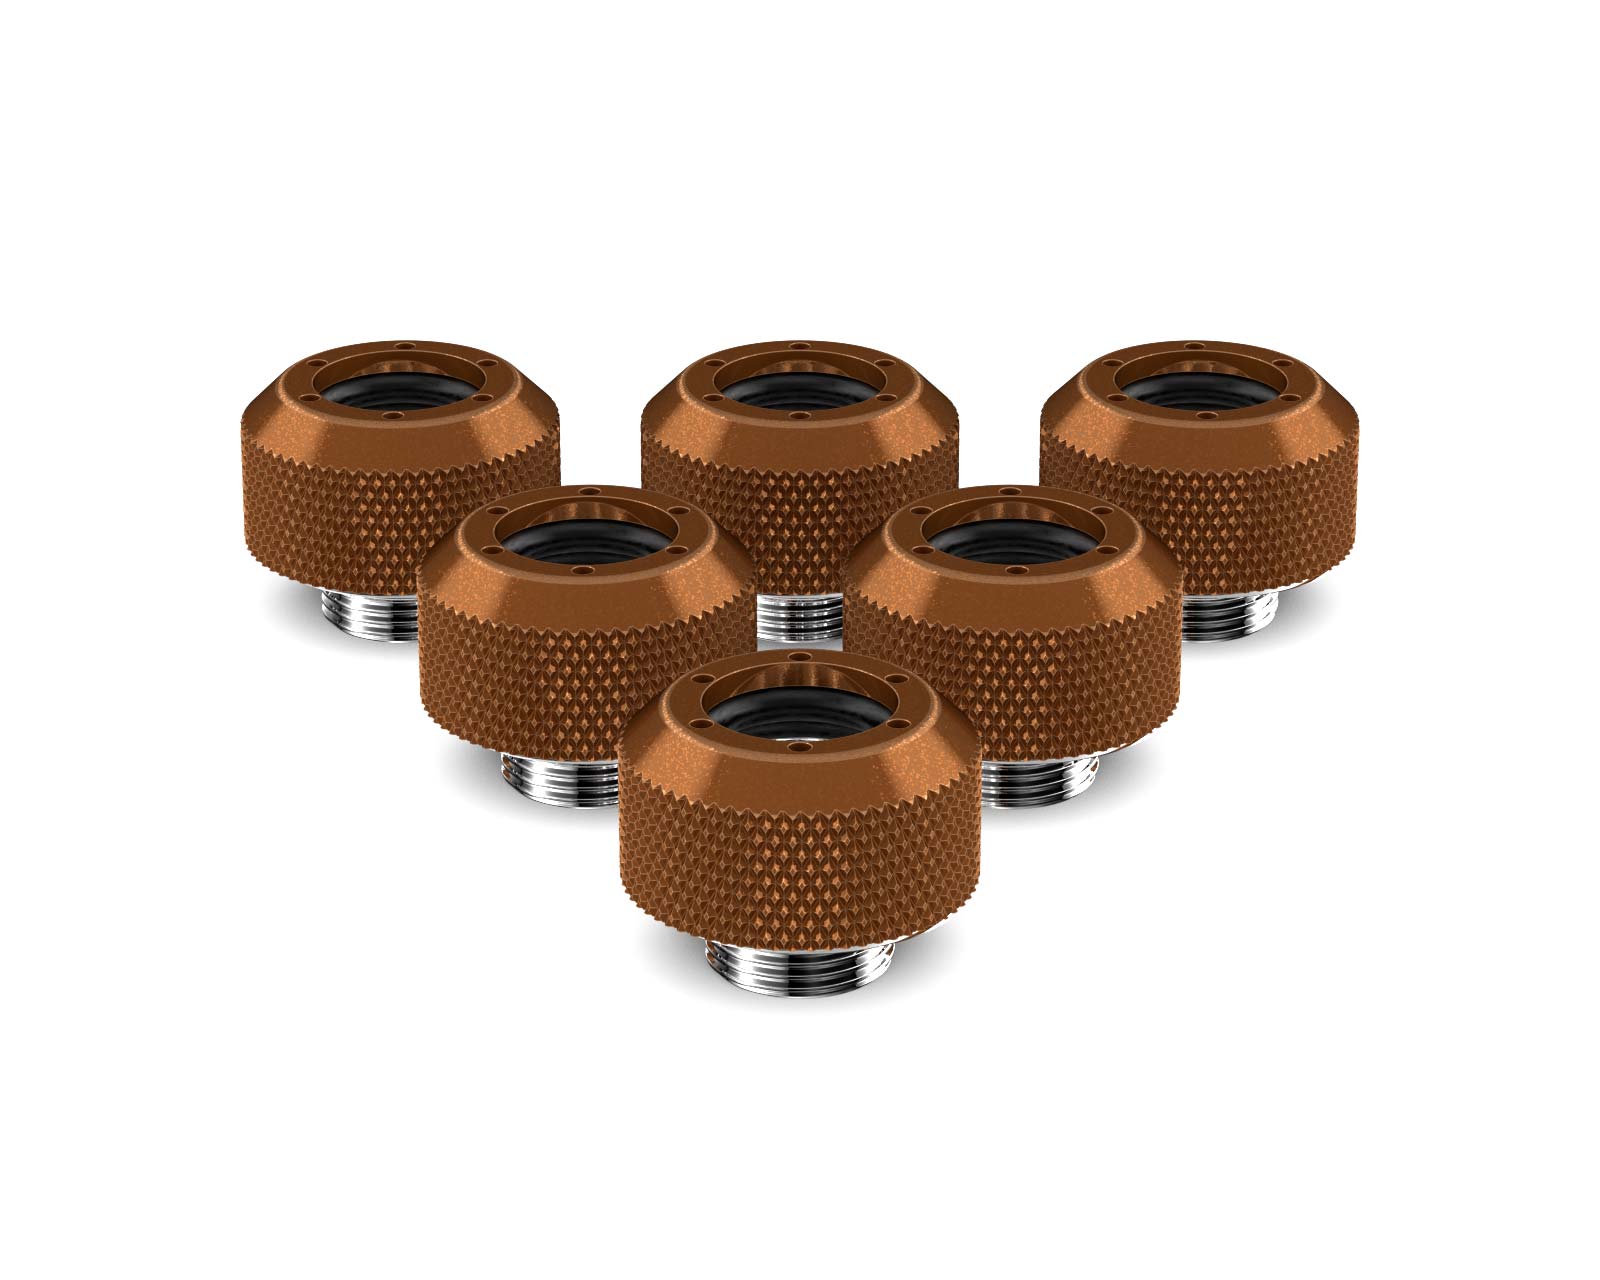 PrimoChill 1/2in. Rigid RevolverSX Series Fitting - 6 pack - PrimoChill - KEEPING IT COOL Copper